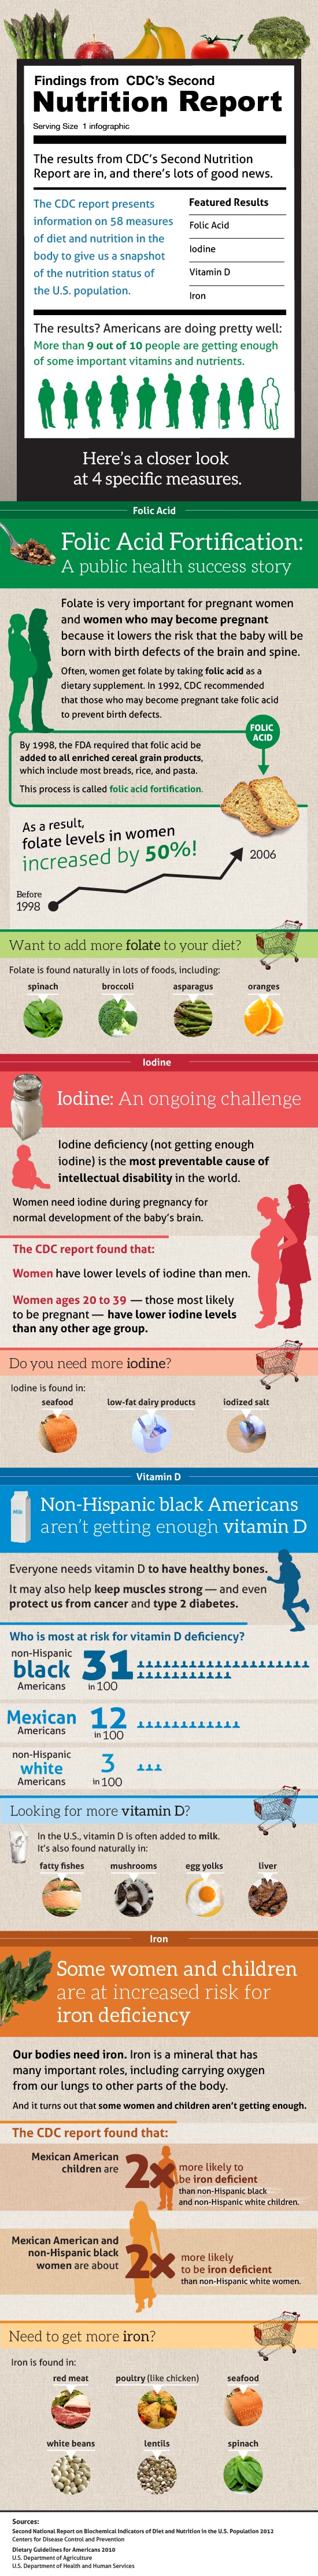 Second Nutrition Report Findings Infographic